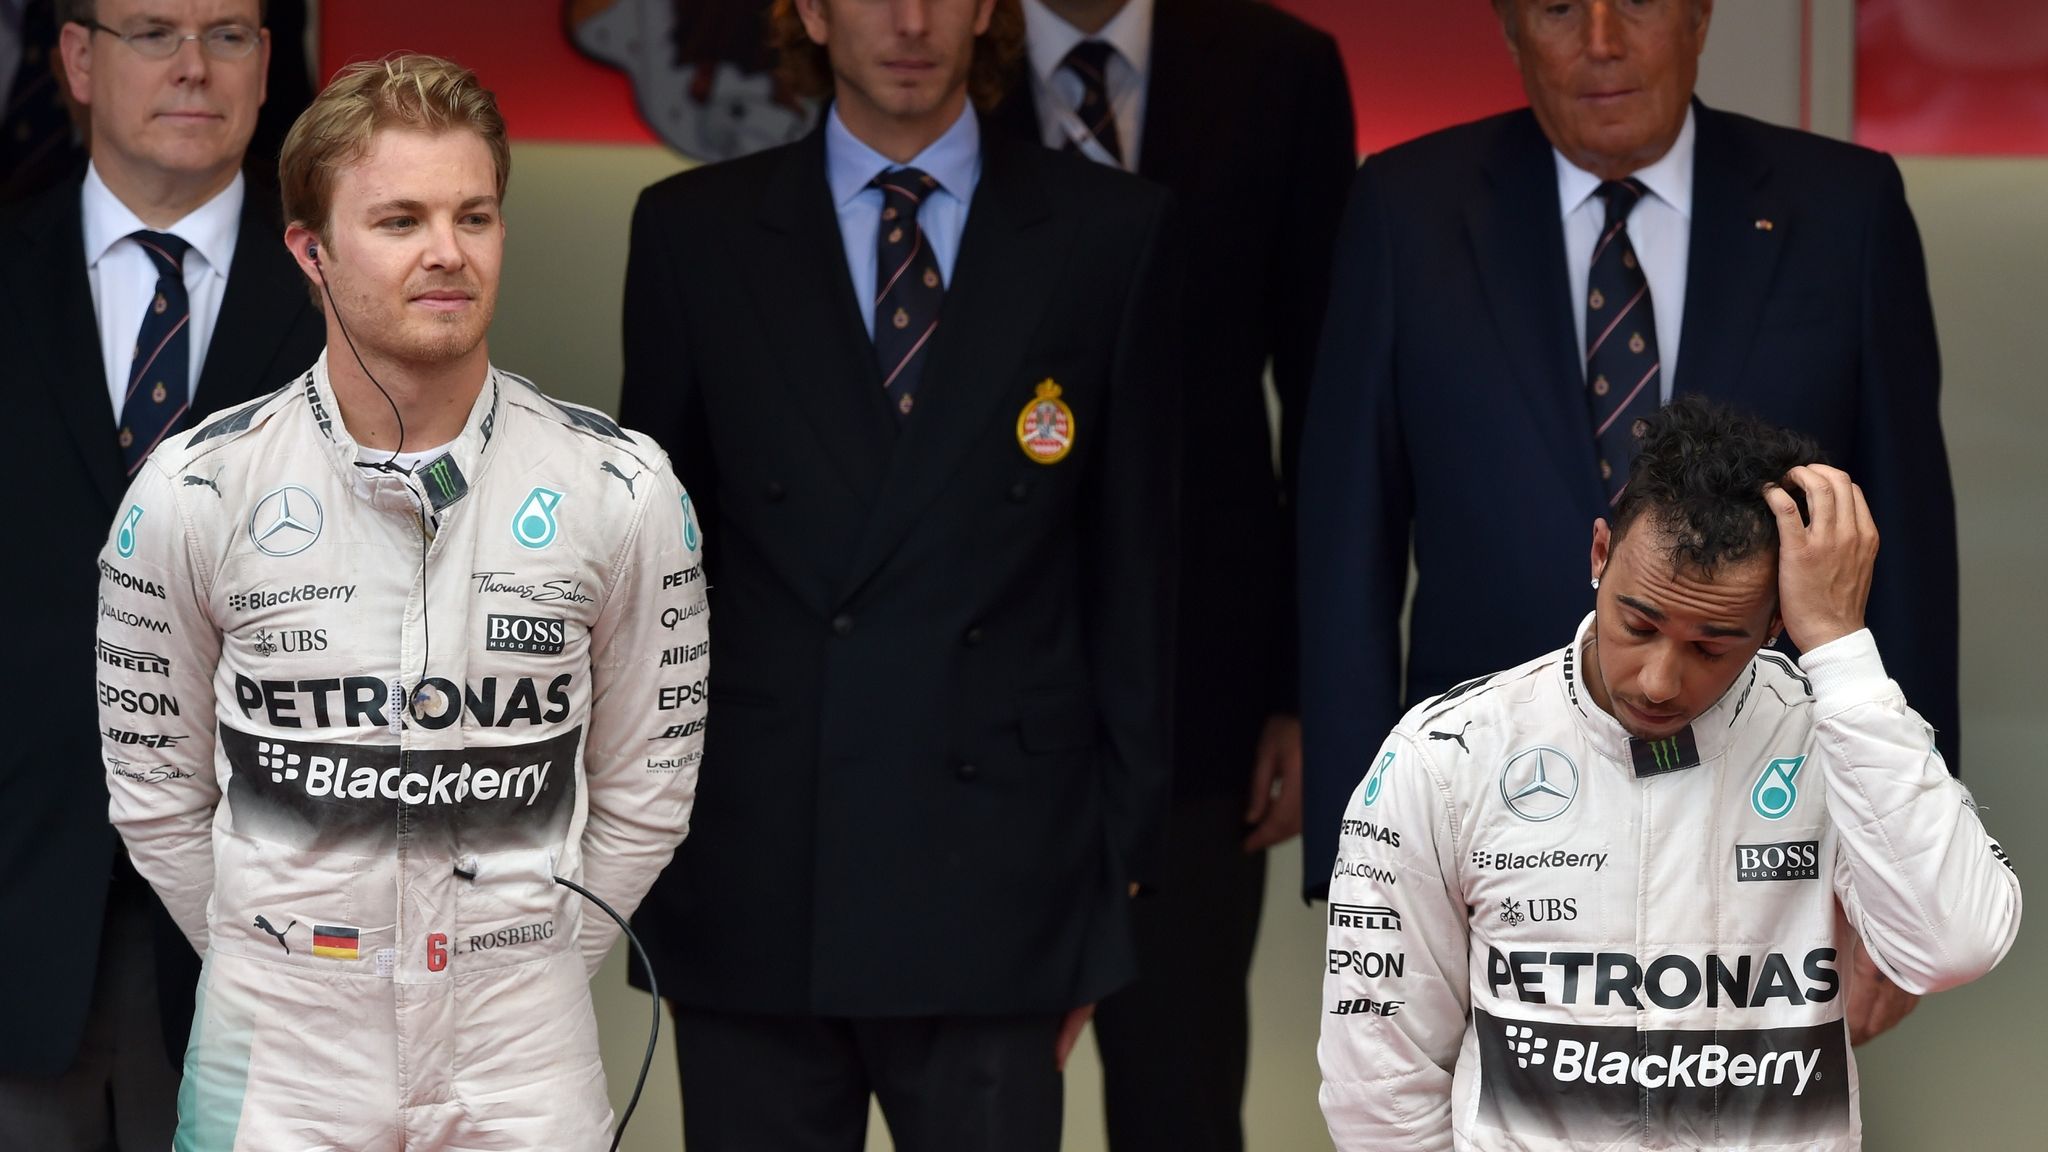 Lewis Hamilton & Mercedes officially crowned 2015 world champions